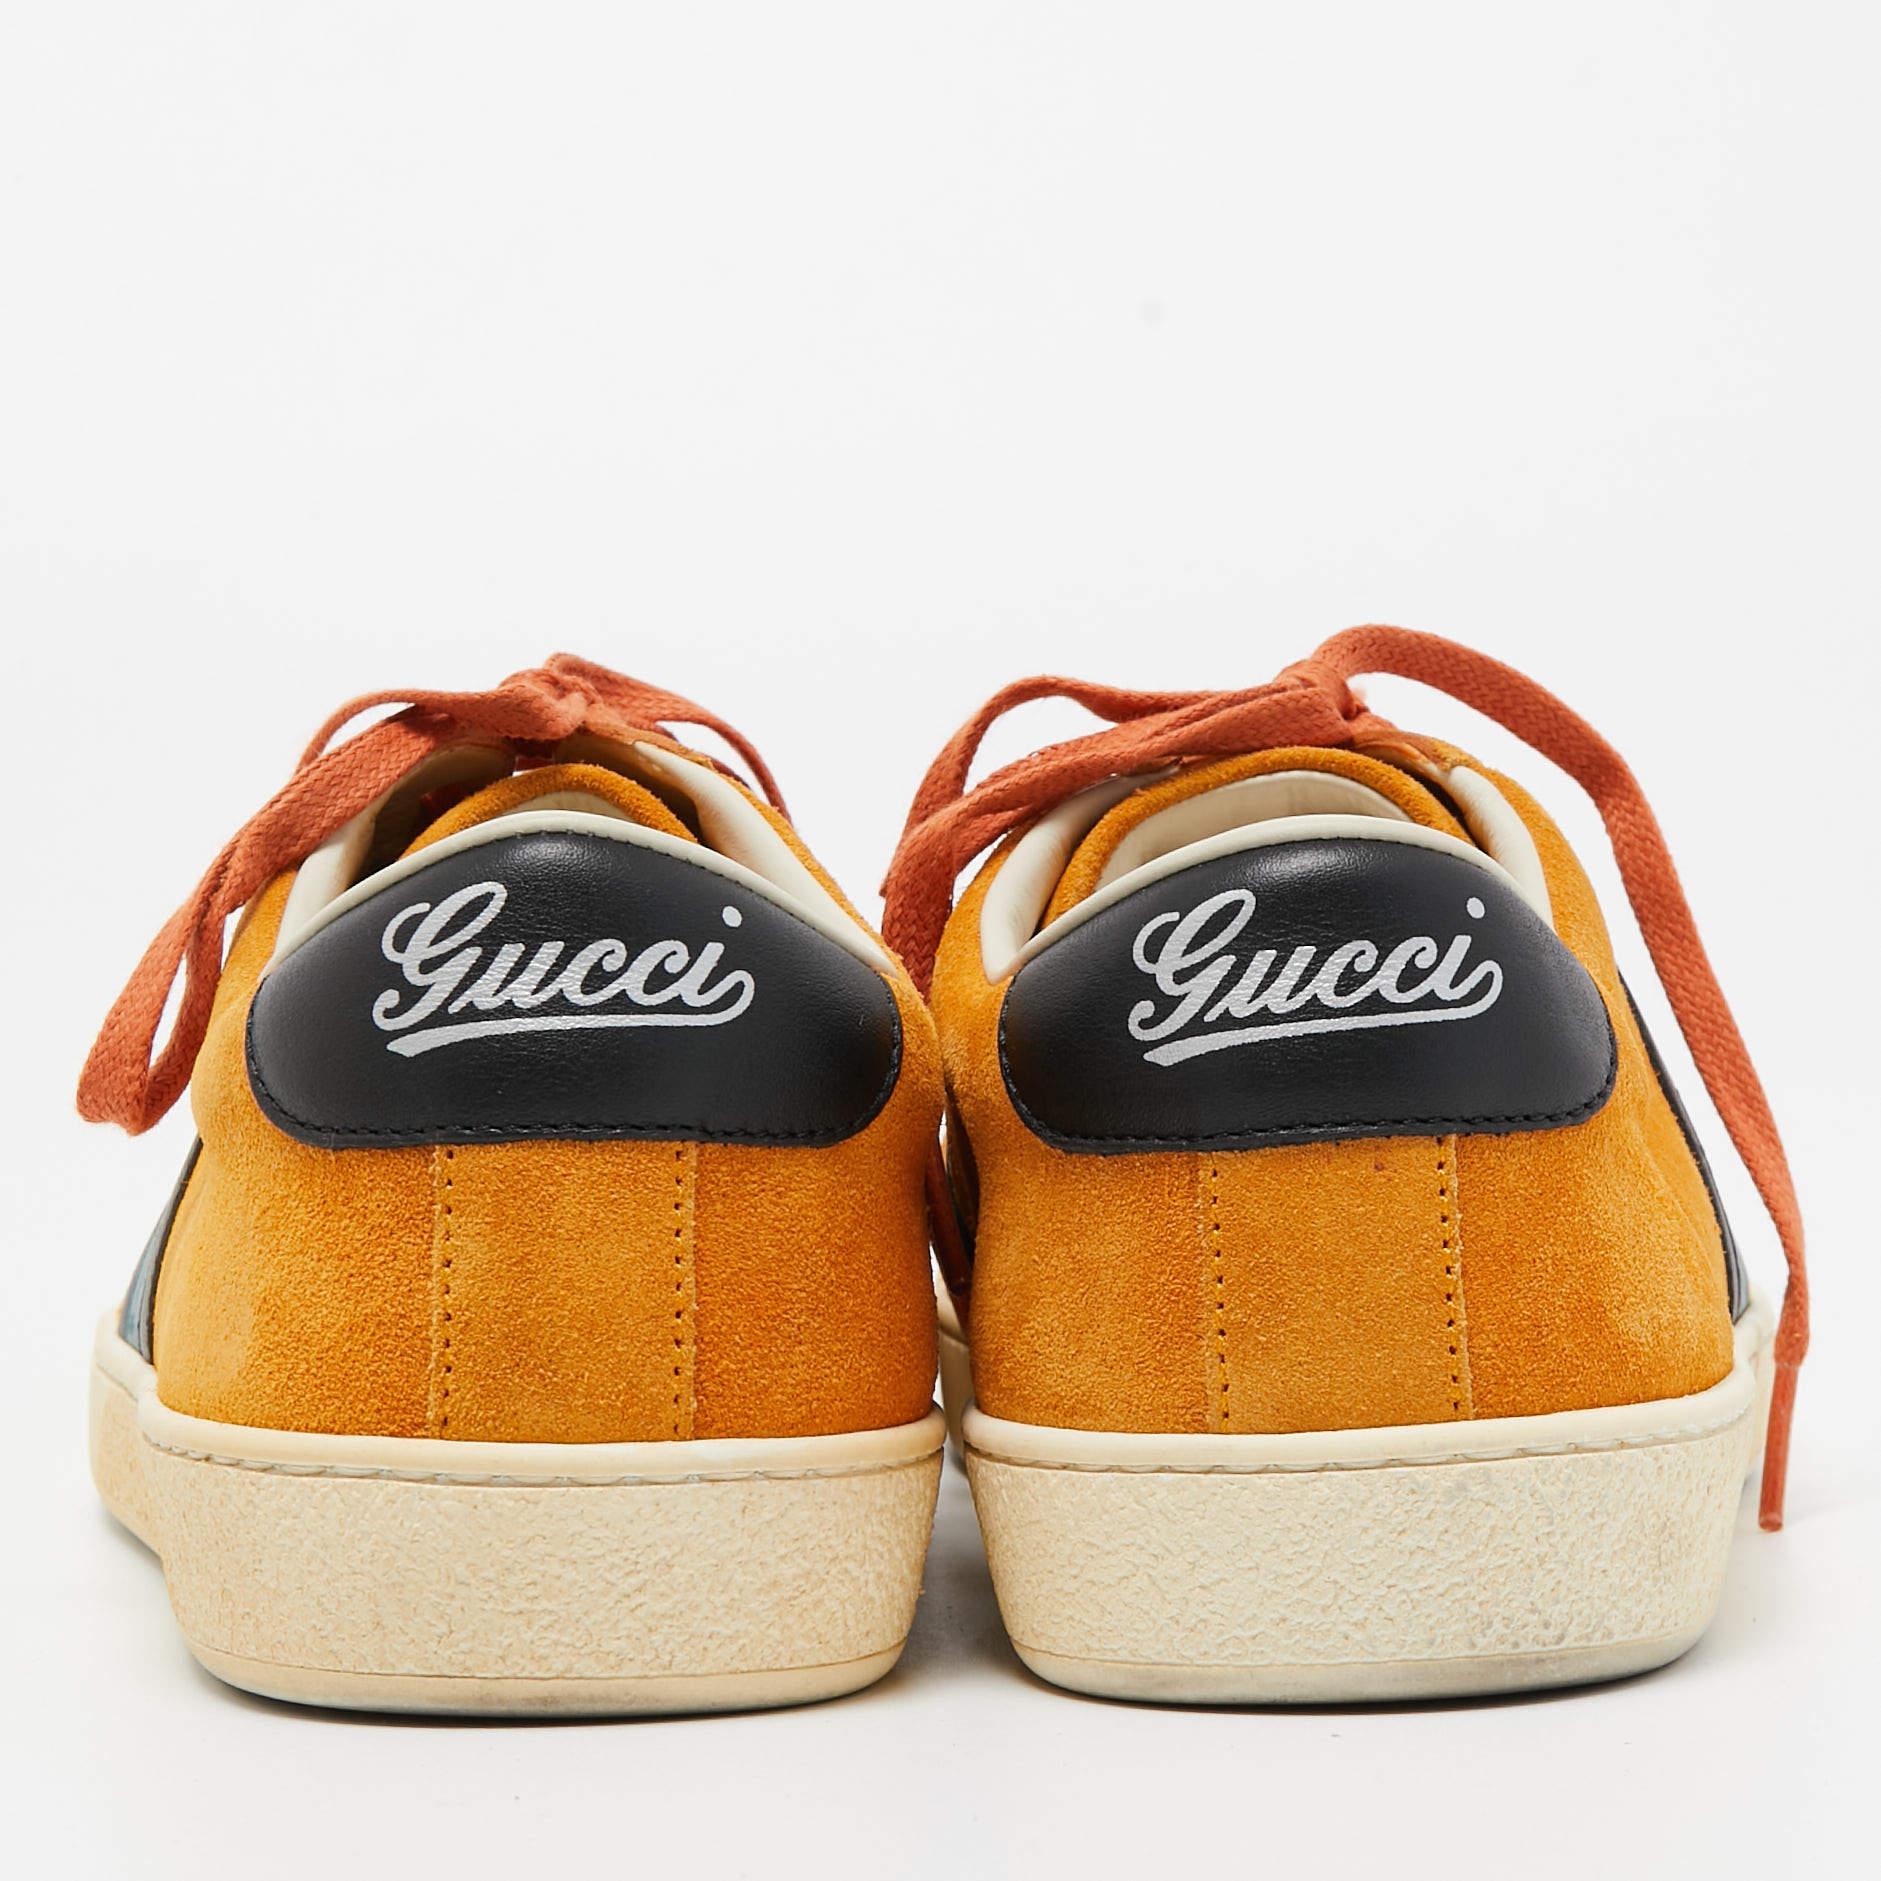 Gucci Mustard Suede Web Low Top Sneakers Size 42.5 2